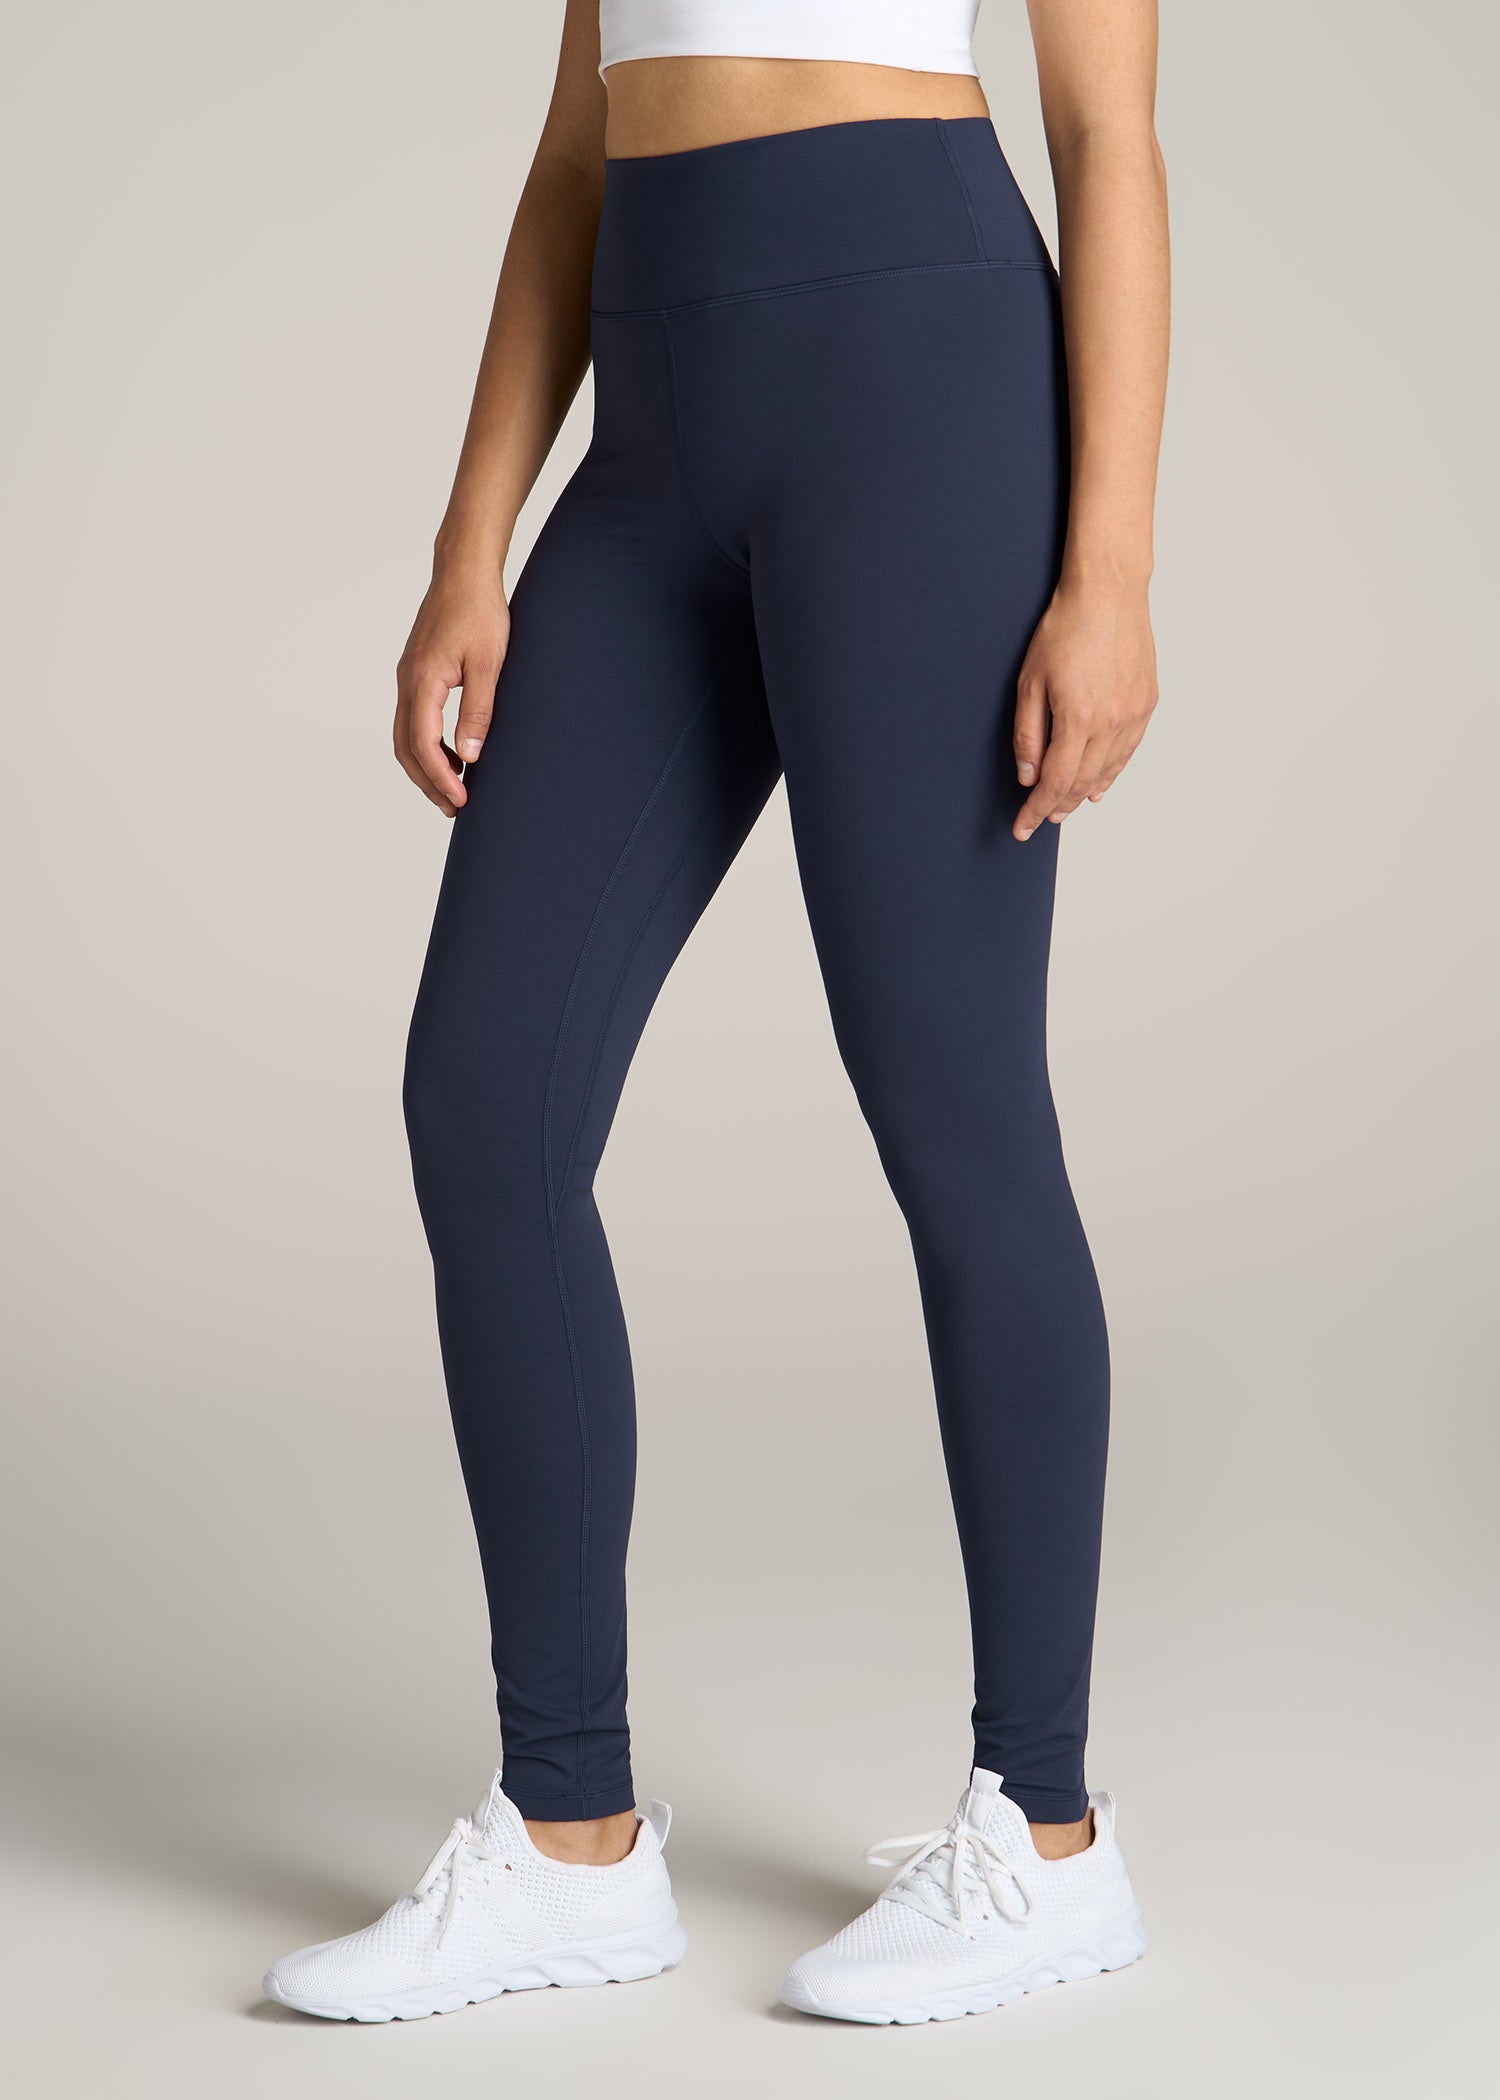 WJFGGXHK Women'S Leggings - Navy High Waisted Leggings Solid Soft Touch  Elastic Opaque Thermal Winter Thick Fleece Lined Legging,Workout Gym Yoga  Stretchy Pants Thick Tights,Navy,M : Amazon.co.uk: Fashion